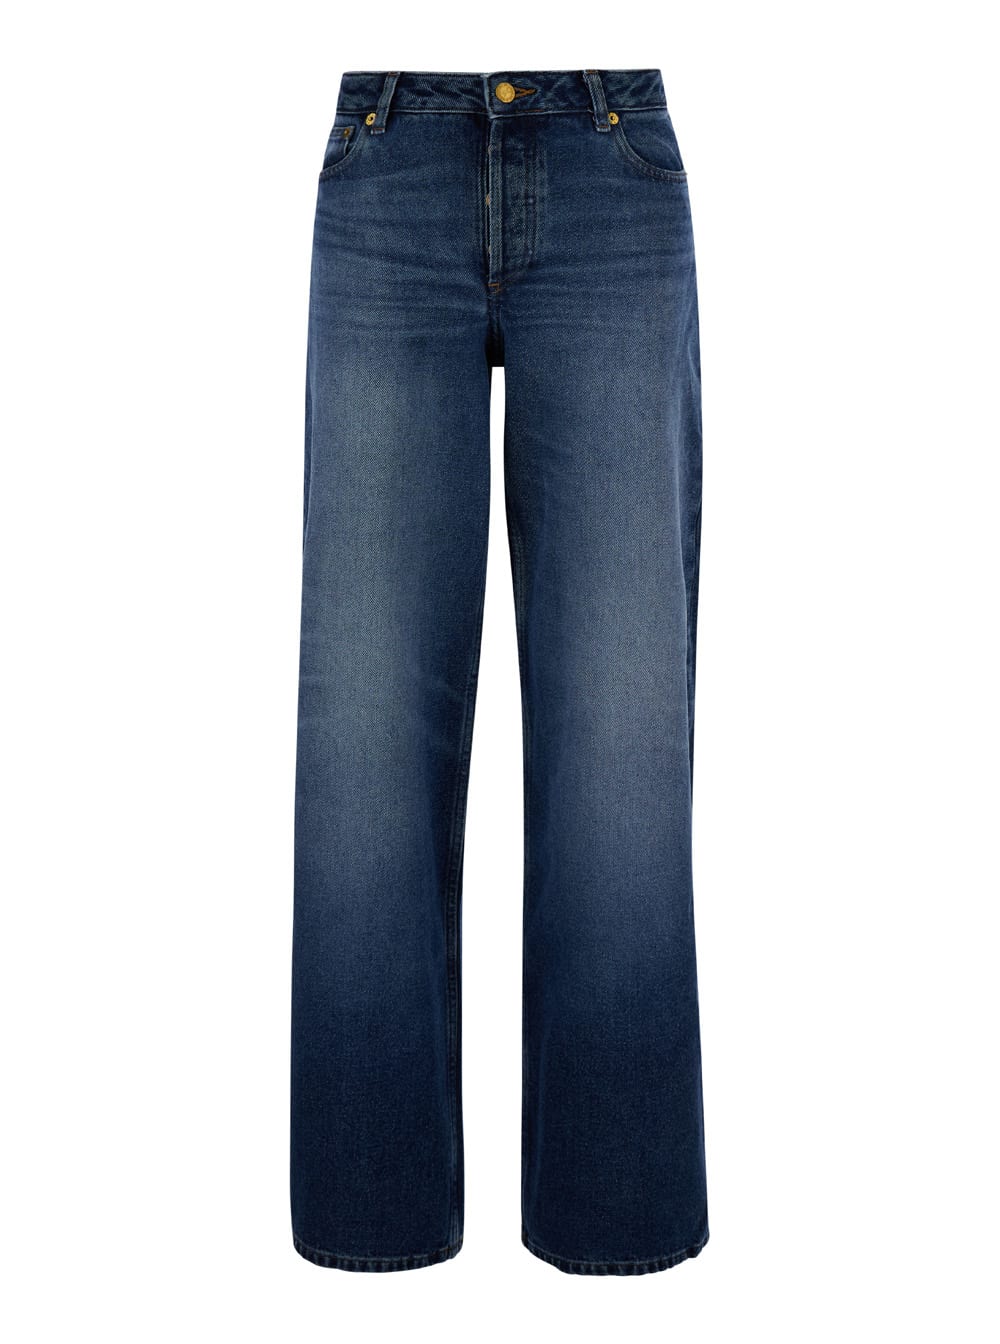 Apc Elisabeth Blue Straight Jeans With Branded Button In Denim Woman